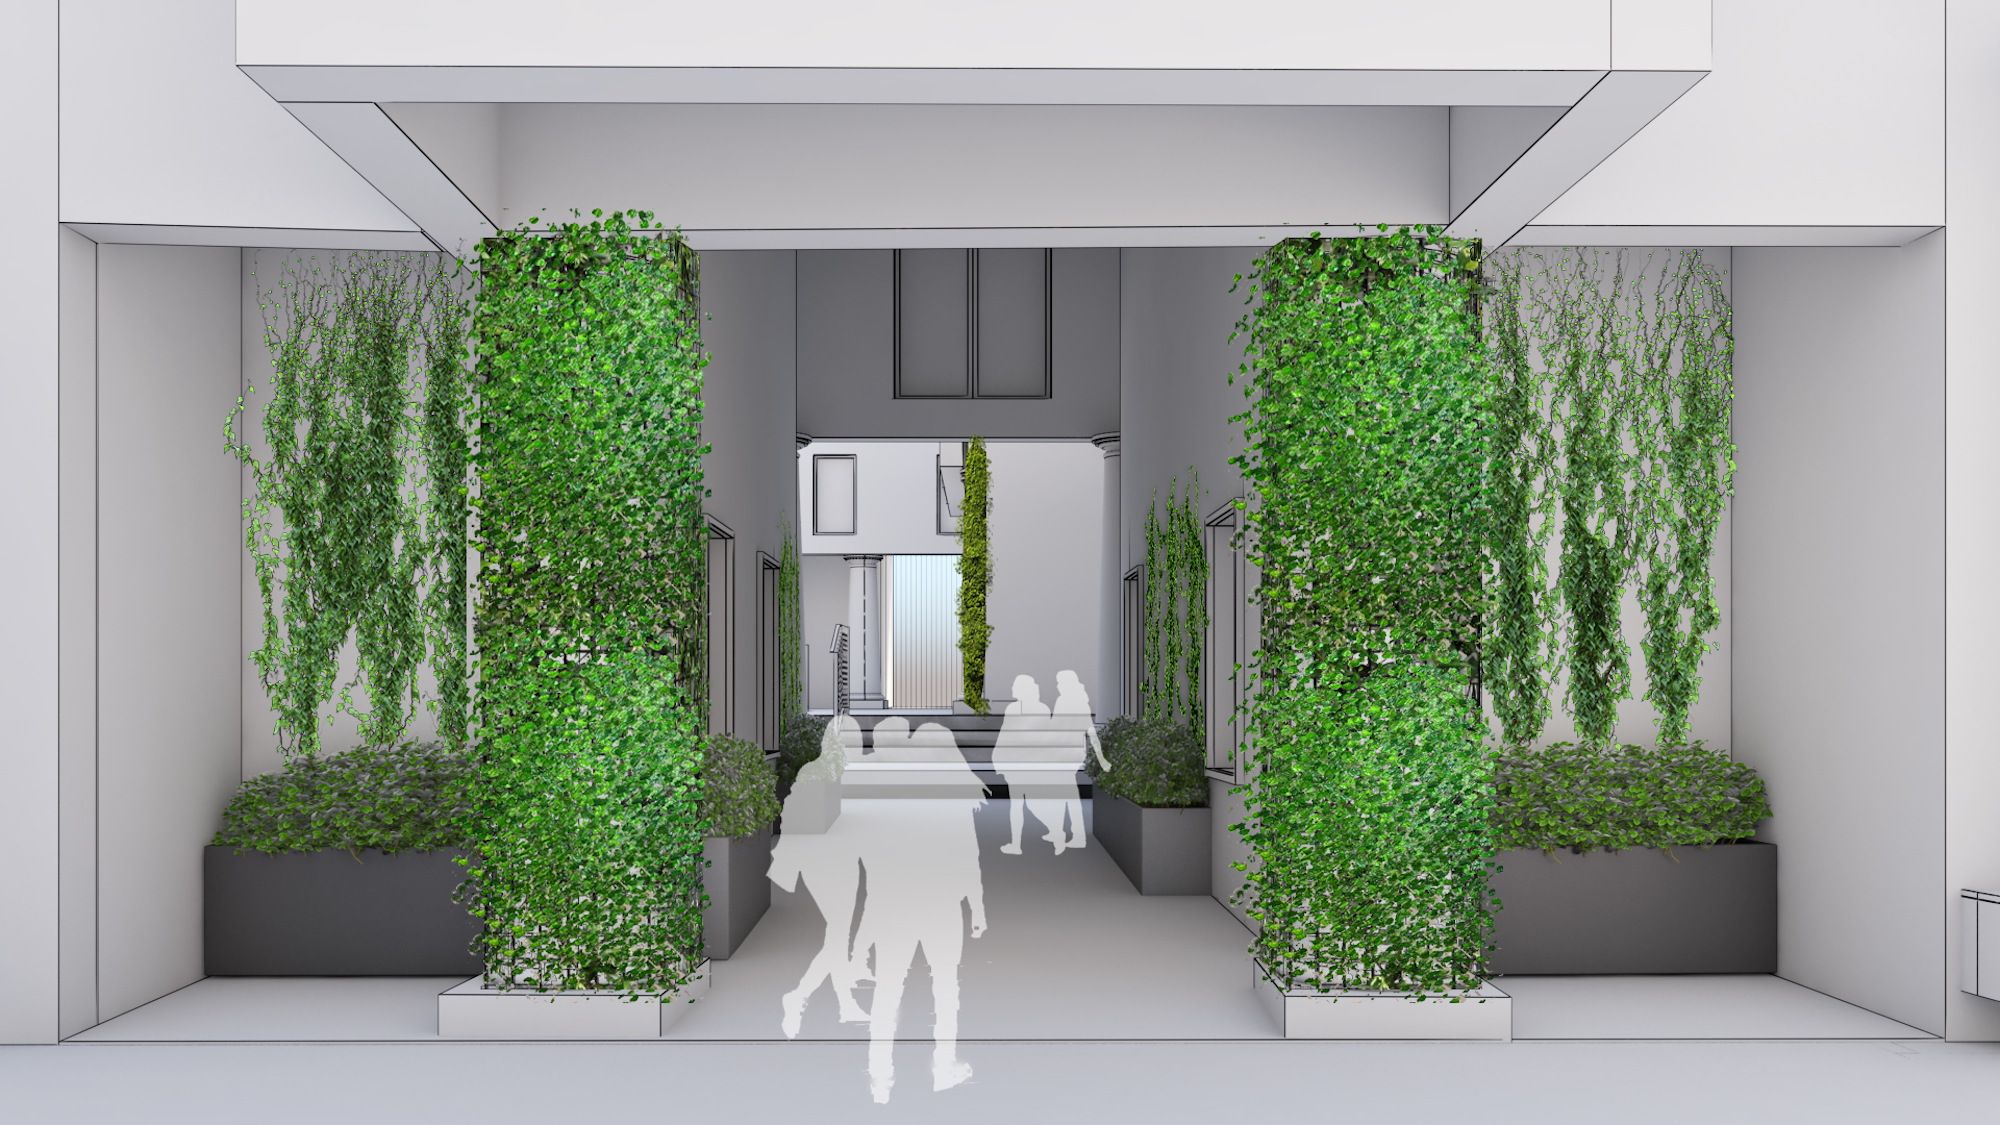 3D visual showing a corridor with vertical planting and ground planters